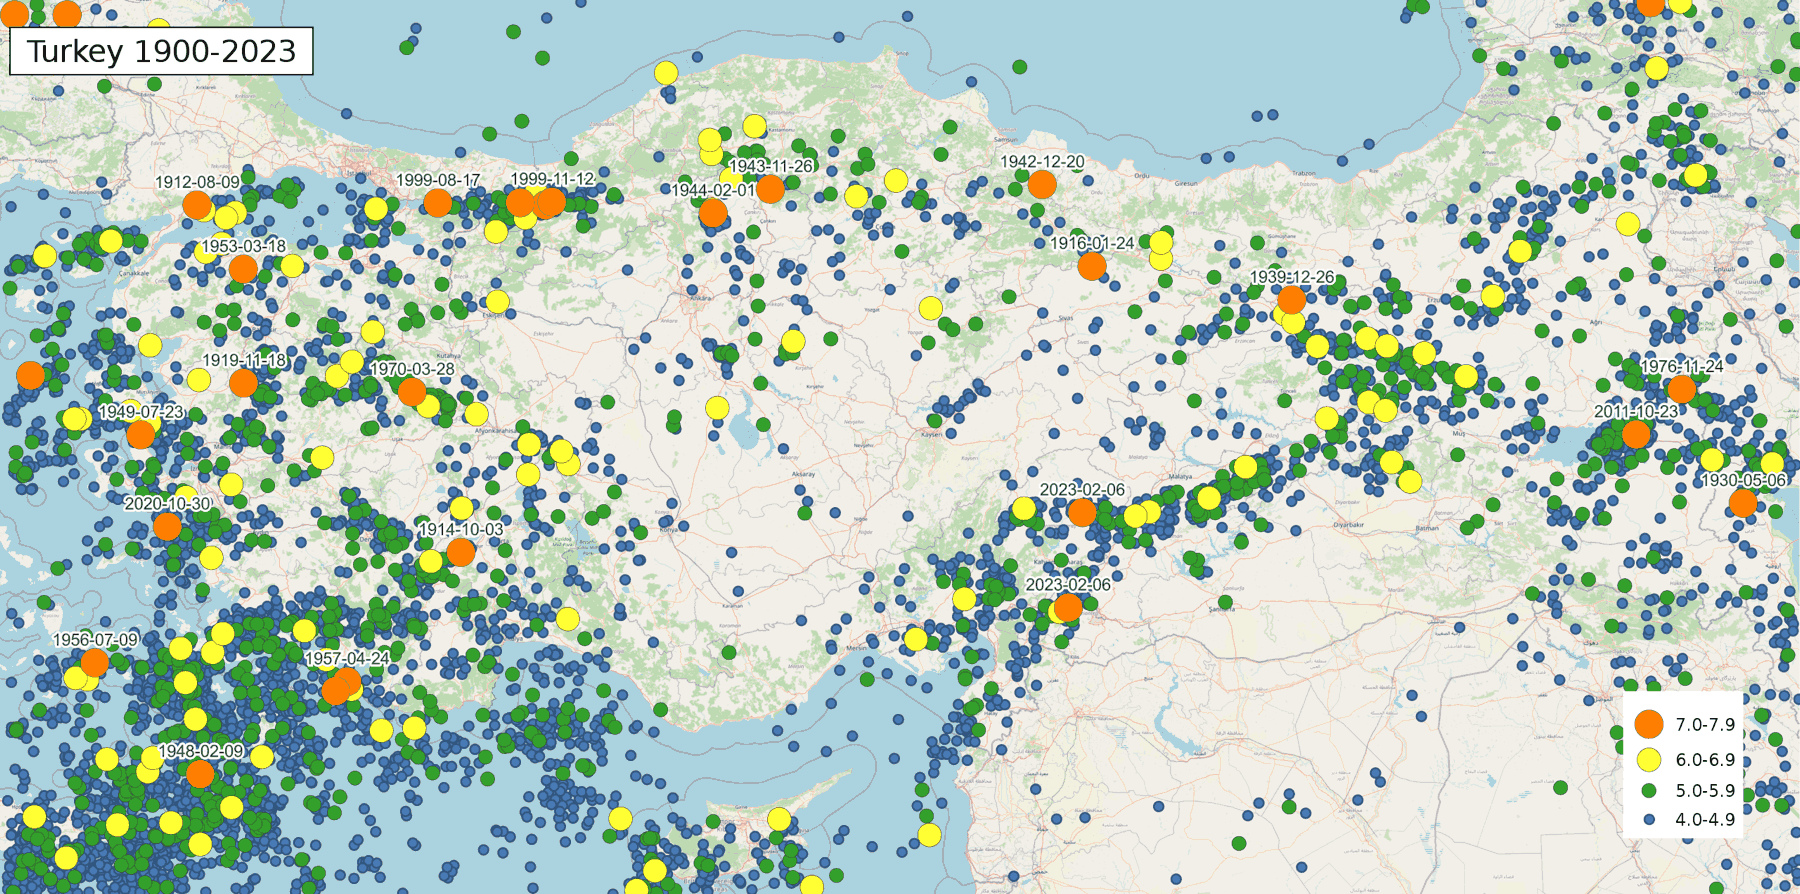 Map of earthquakes in Turkey 1900-2023 - Data source: Search result, USGS - Wikimedia